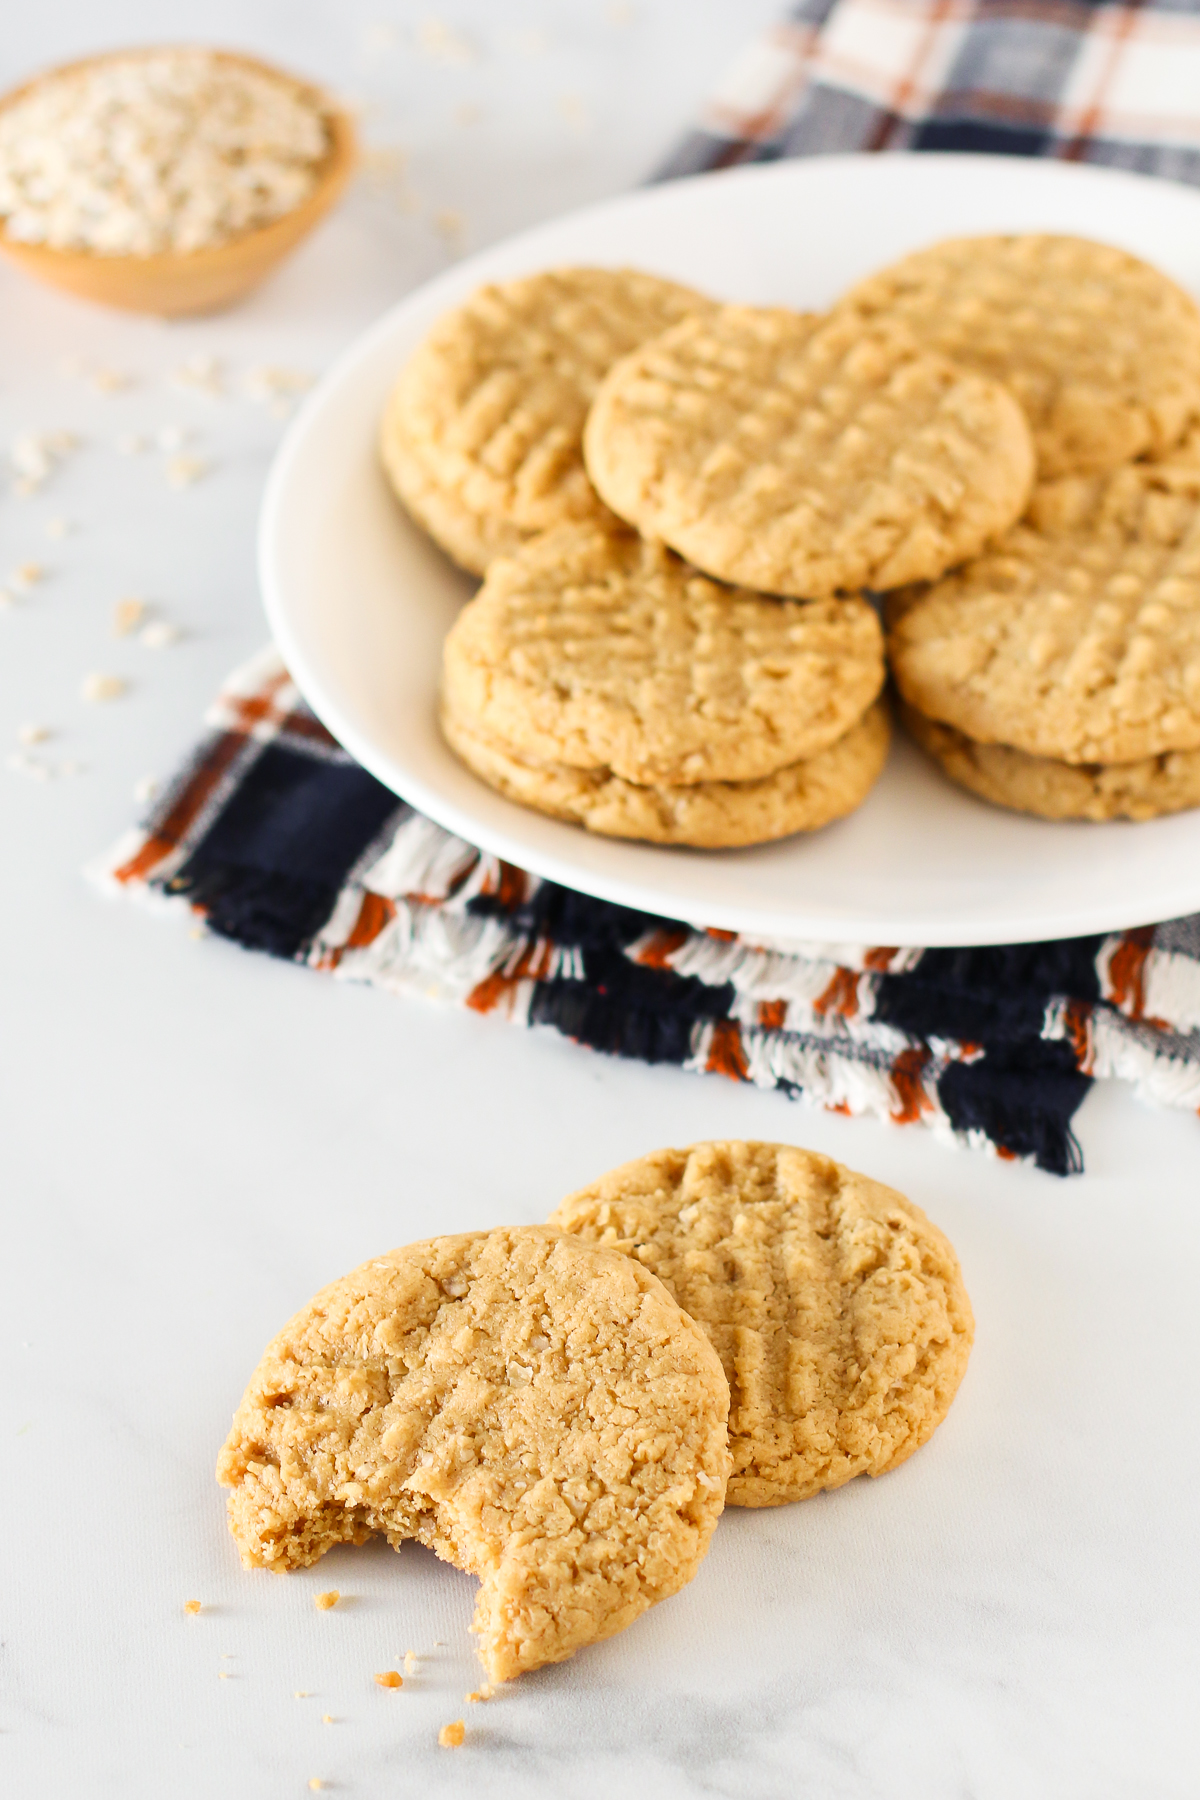 Gluten Free Vegan Peanut Butter Oatmeal Cookies. You’re going to swoon over these chewy, perfect peanut butter cookie!